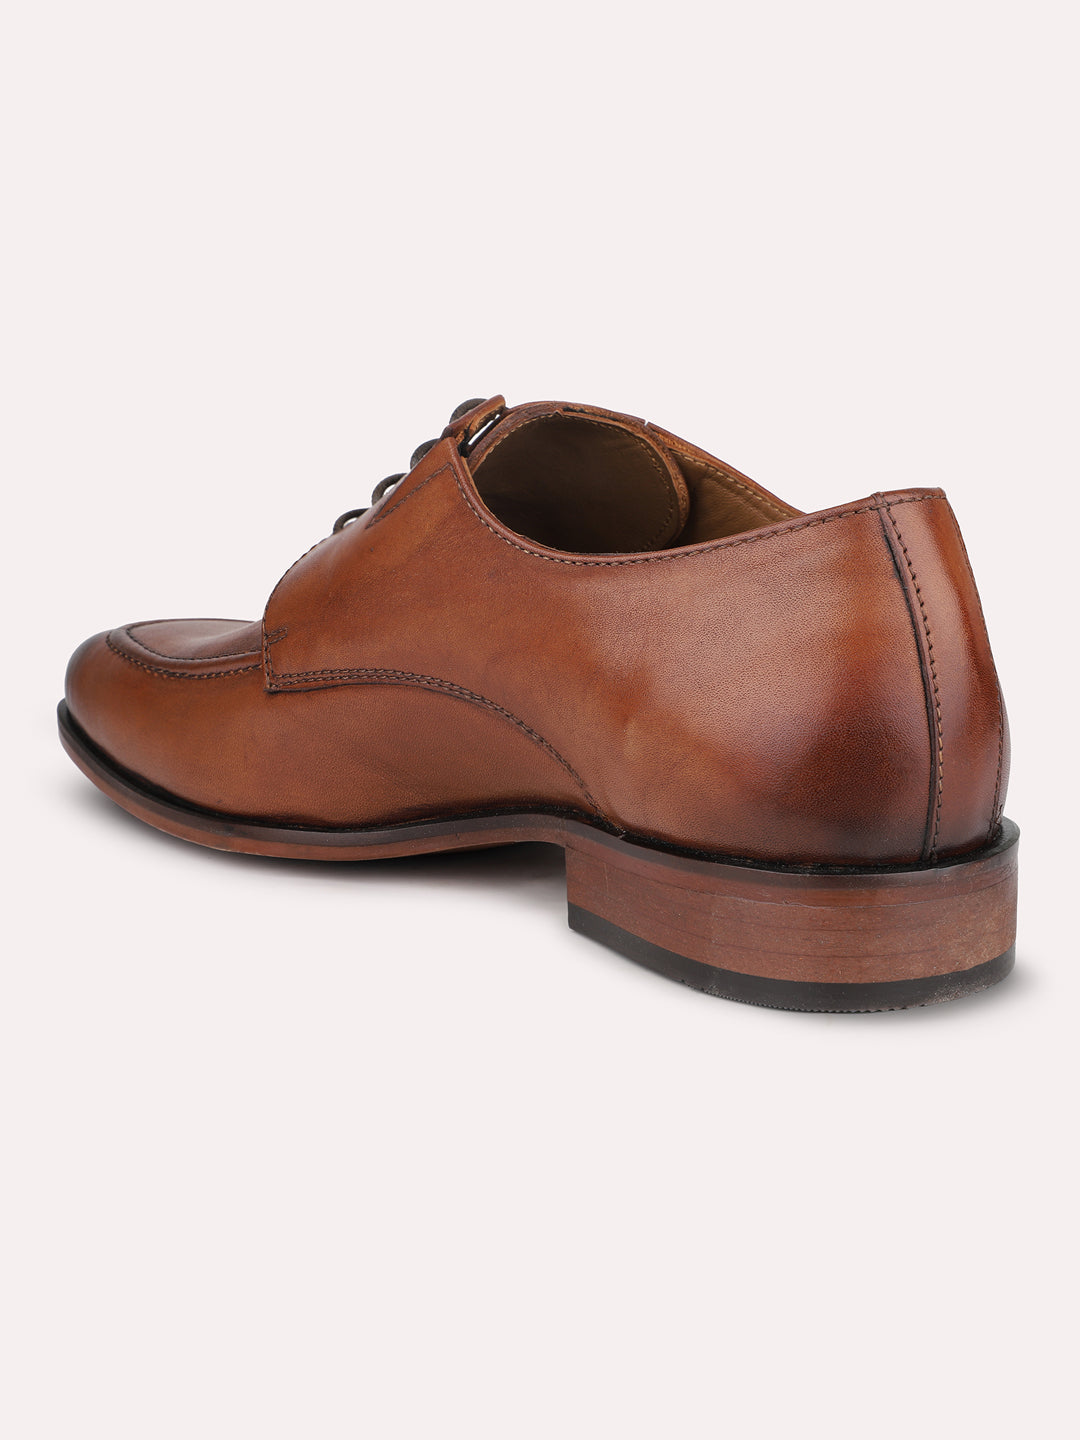 Atesber Tan Formal Lace-up Shoes For Mens